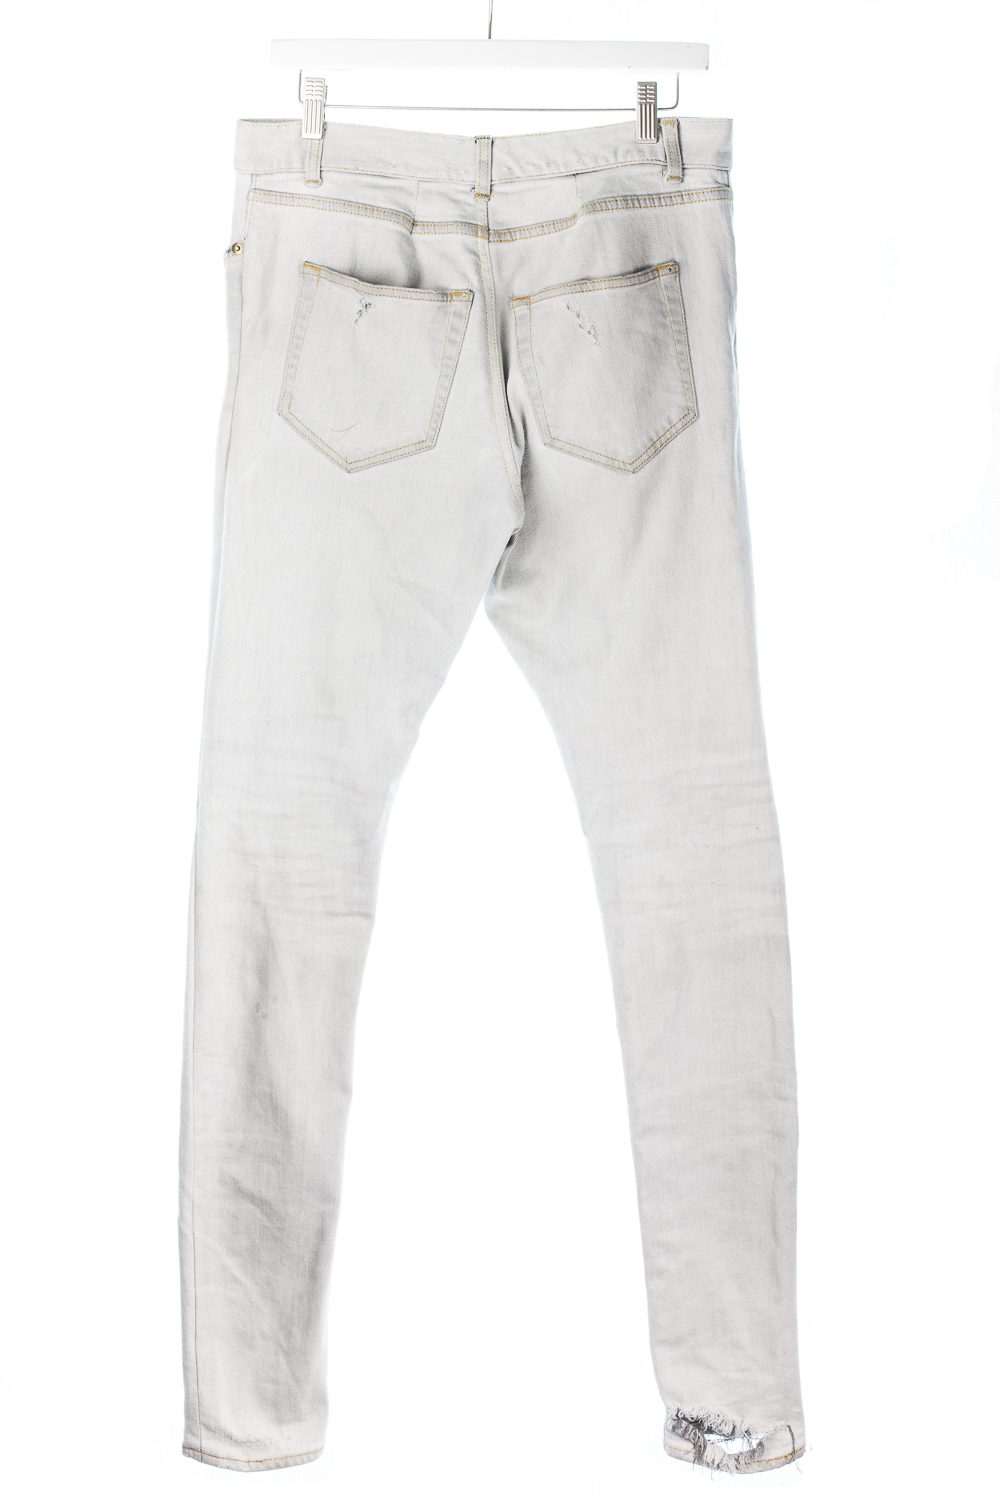 SS13 D02 Grey Washed Distressed Denim